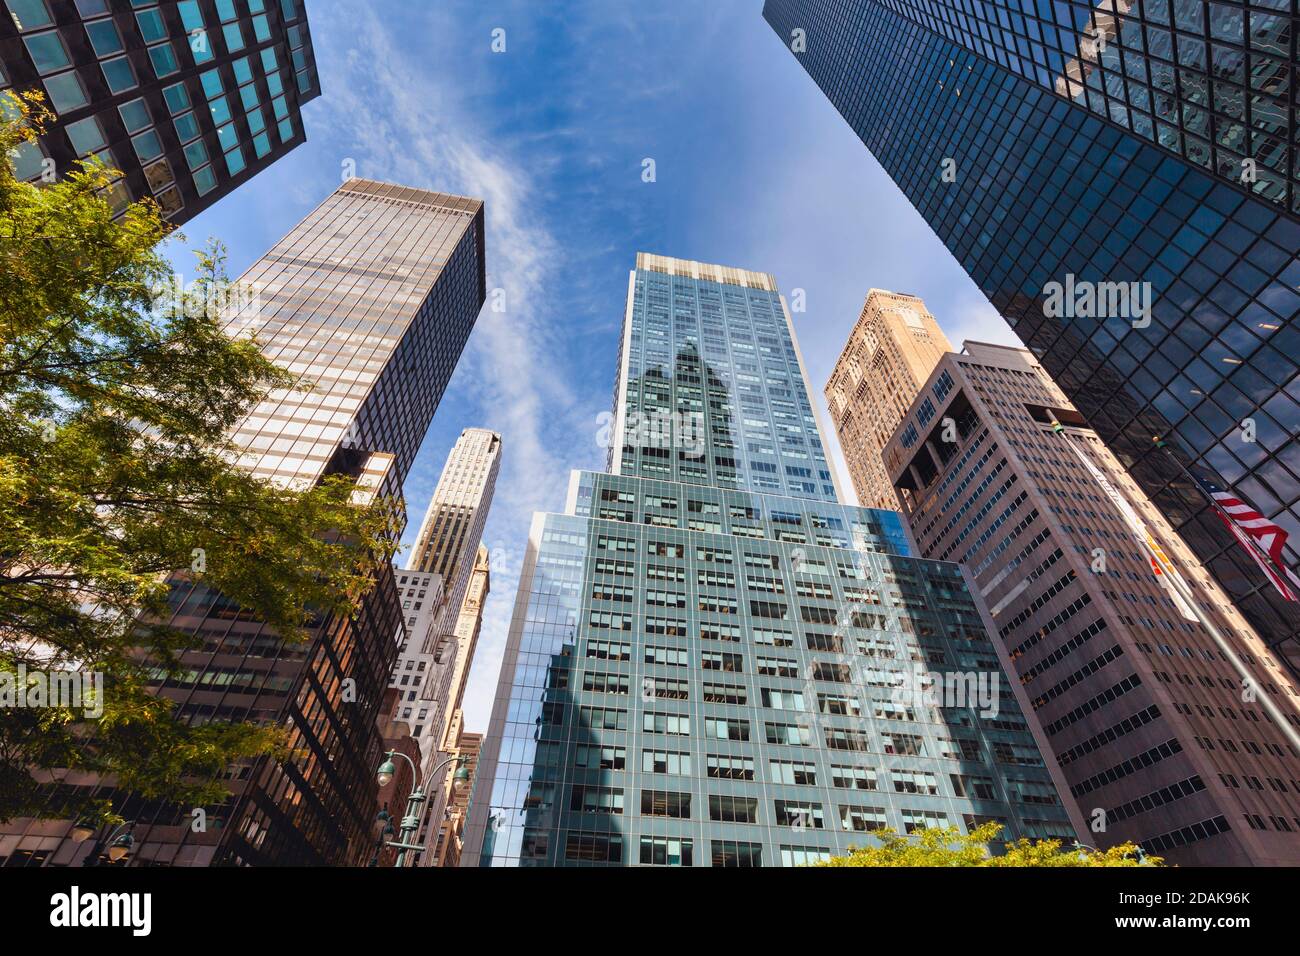 Skyscraper view seen from corner of E 40th Street and Park Avenue, New York City, New York State, United States of America. Stock Photo